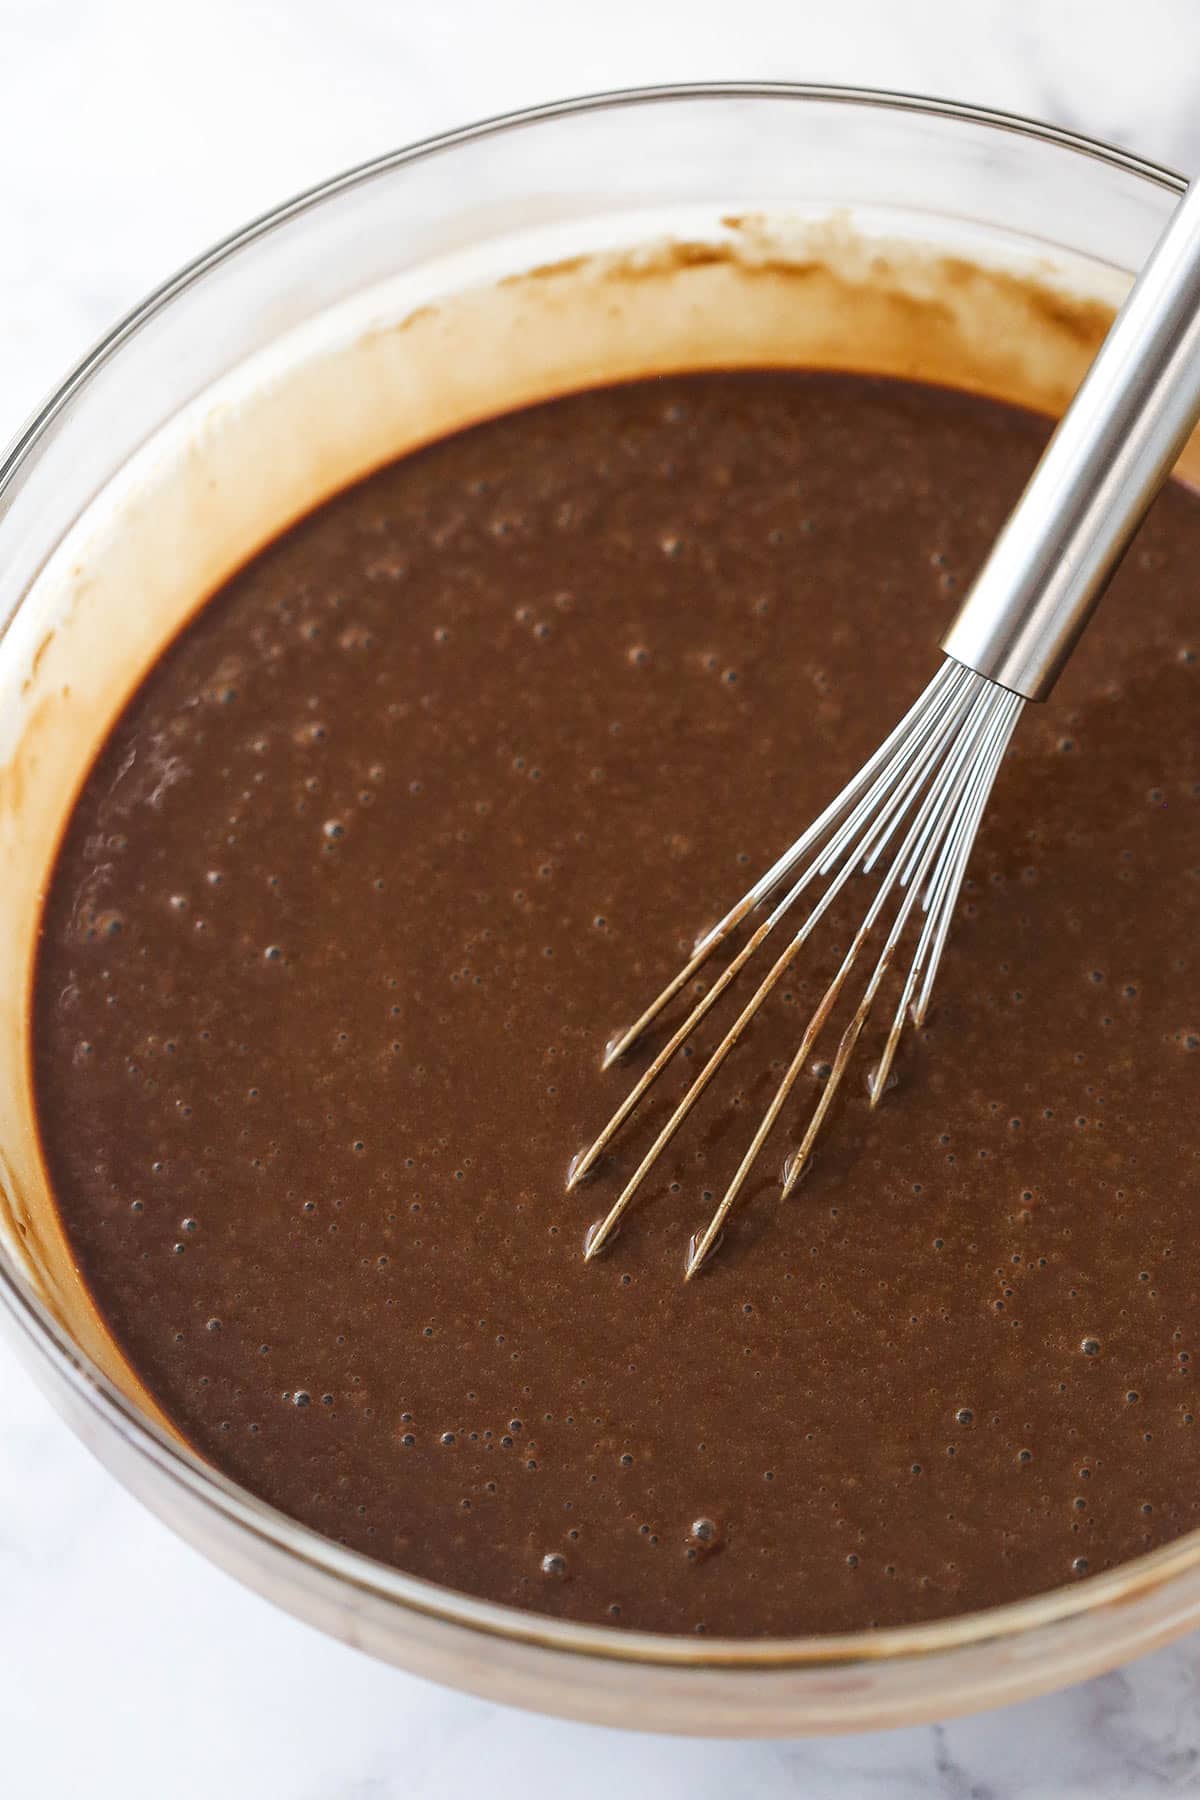 Whisking the vanilla and hot water into chocolate cake batter.